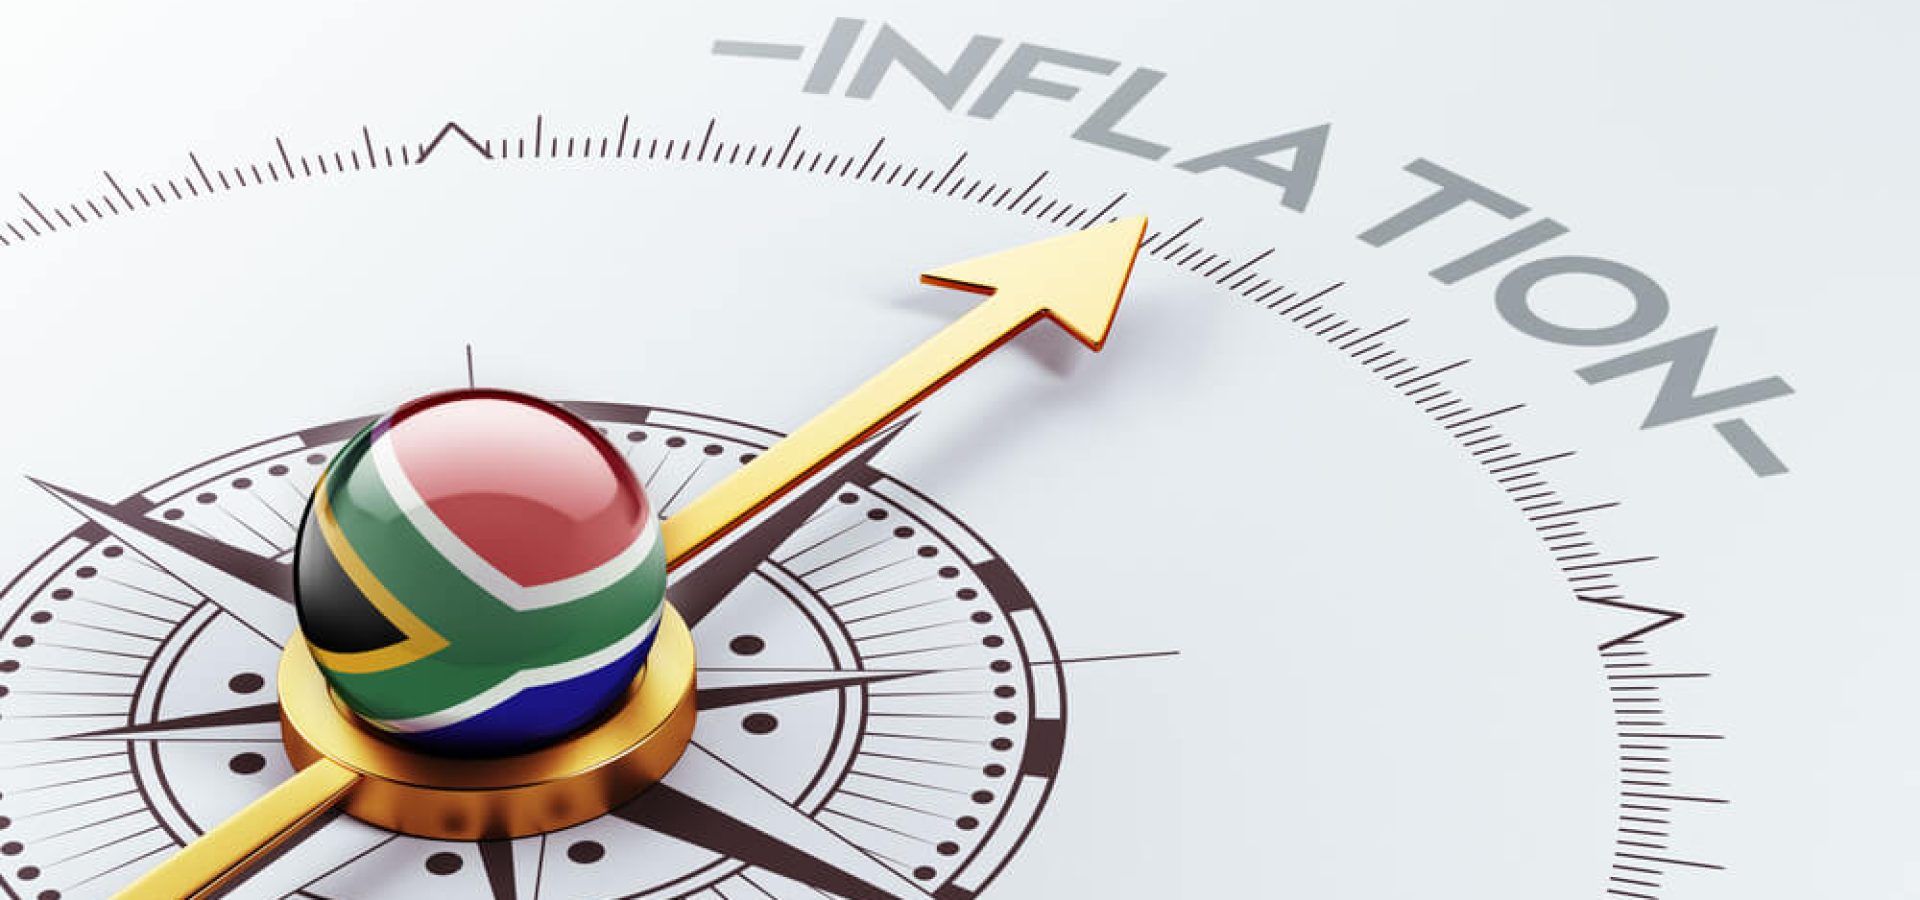 South Africa’s inflation